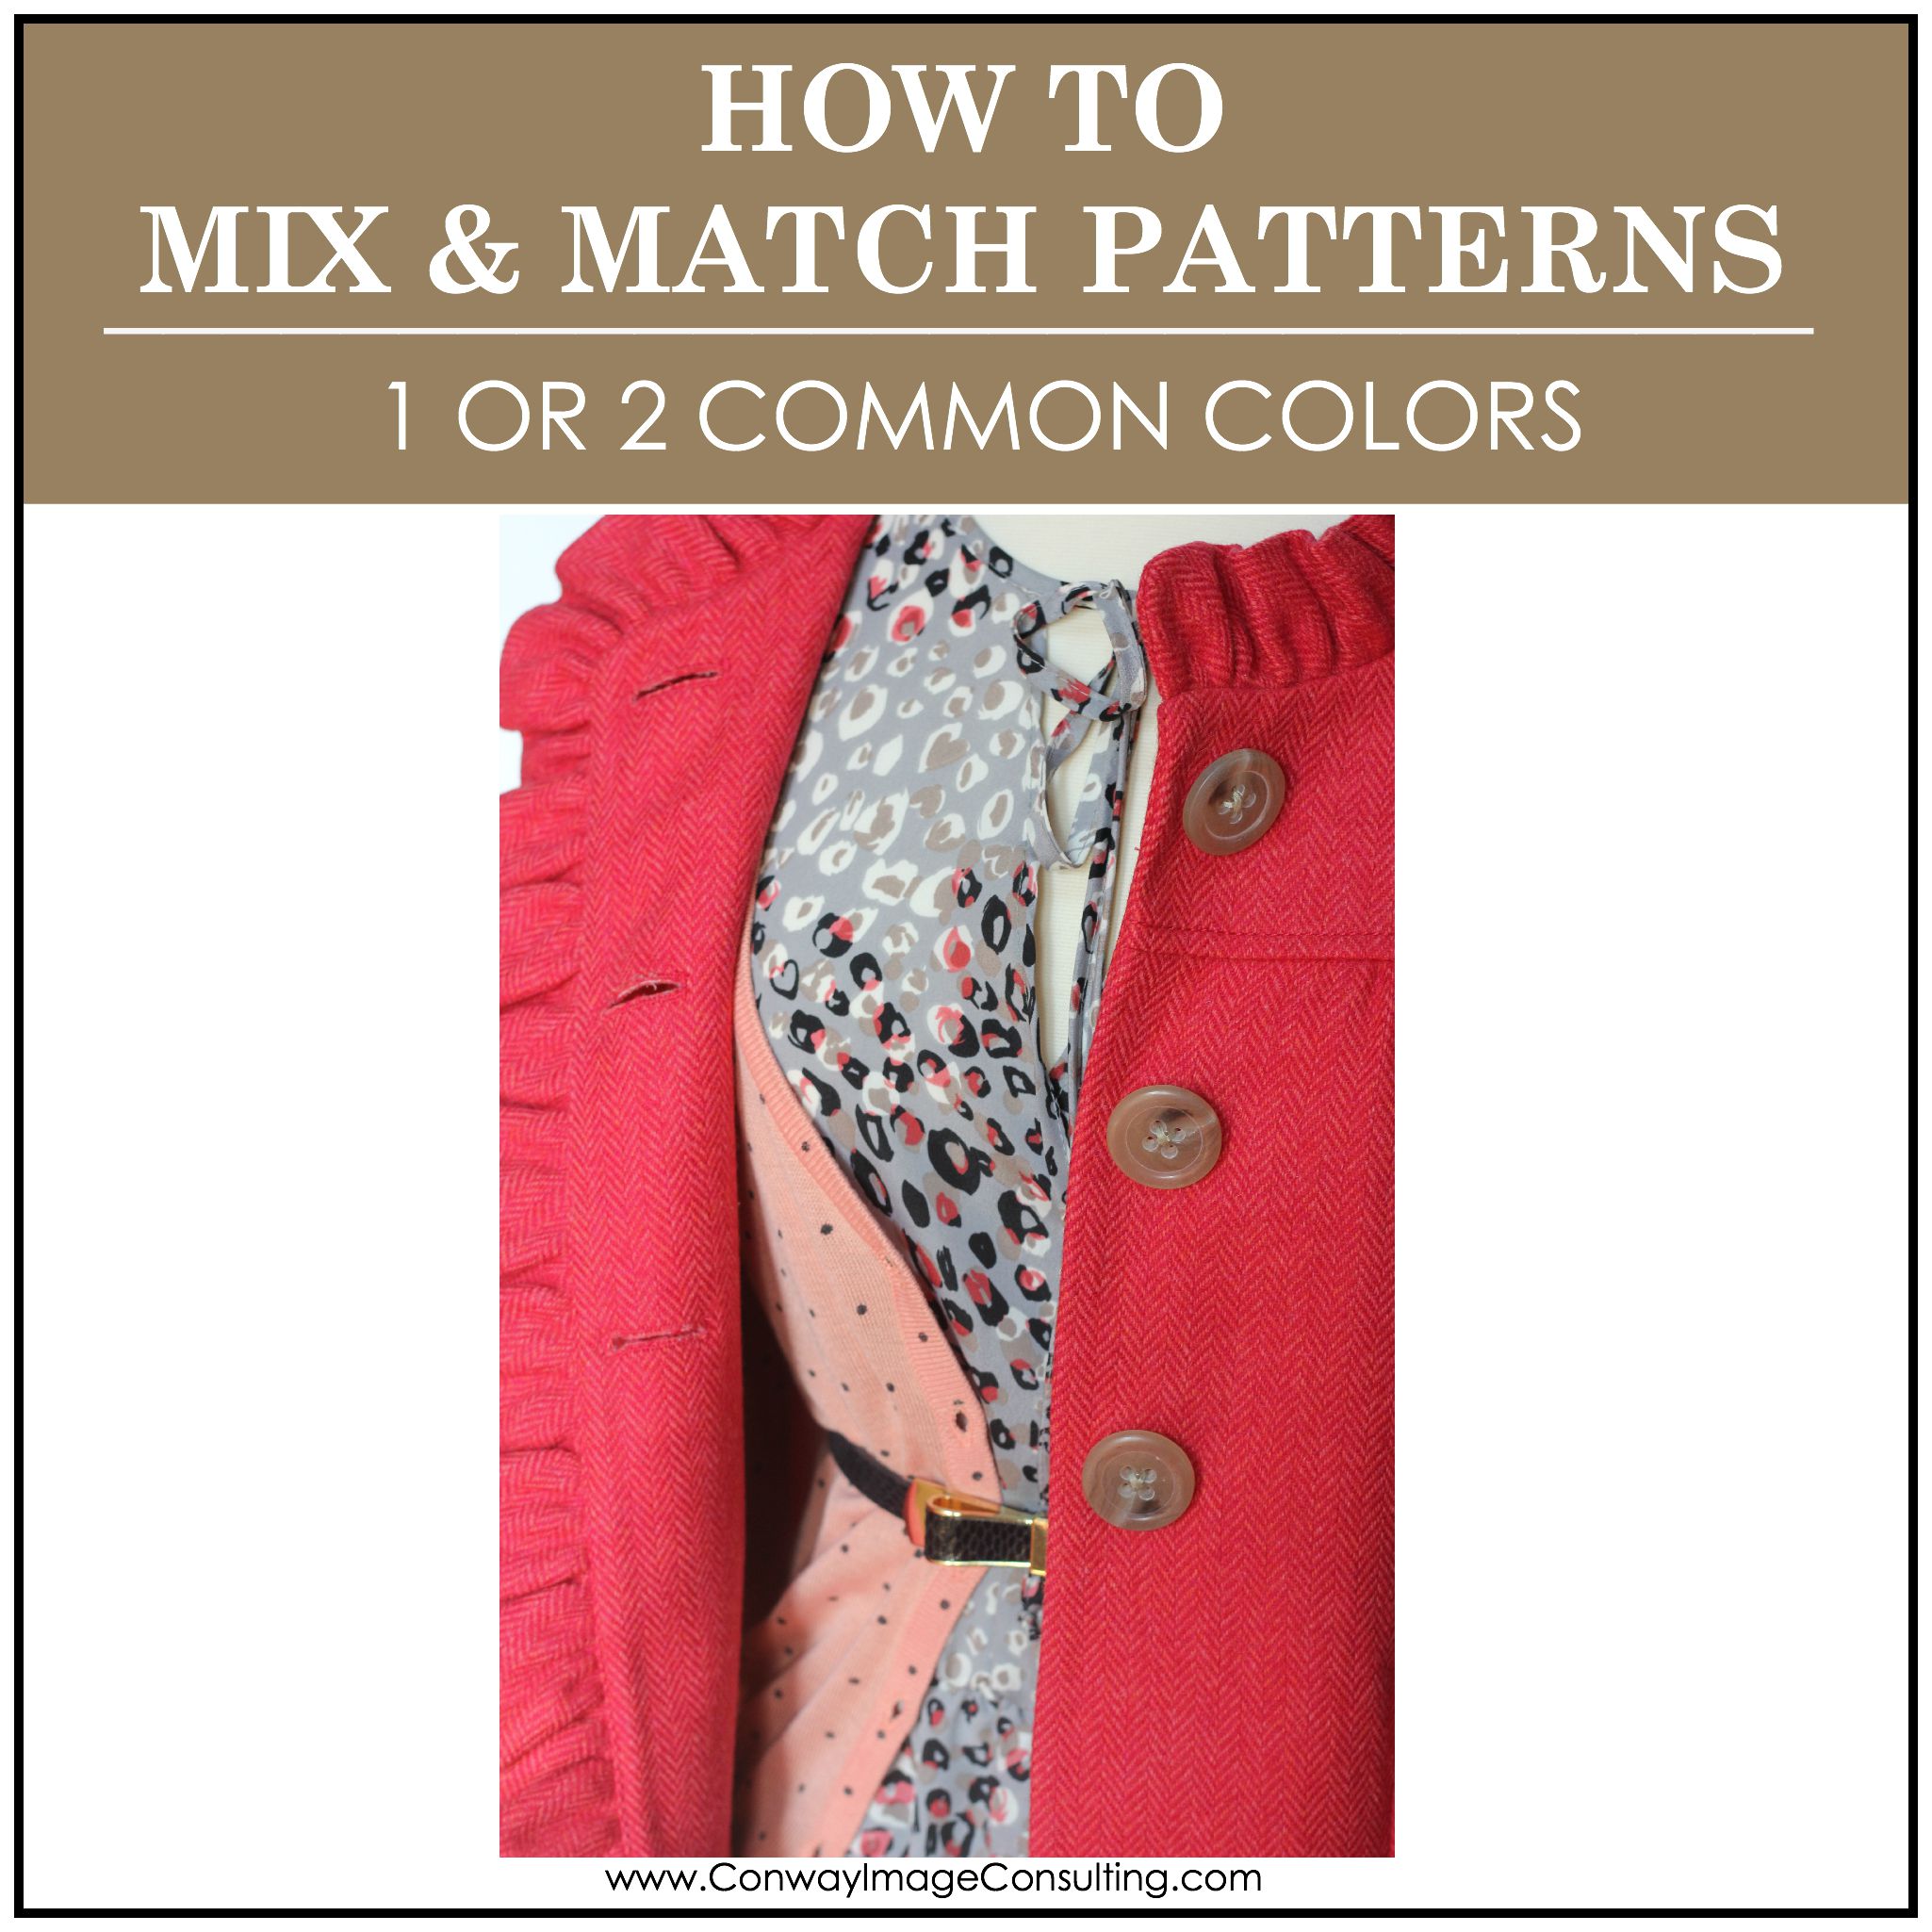 Mix & Match Patterns - 1 or 2  Common Colors